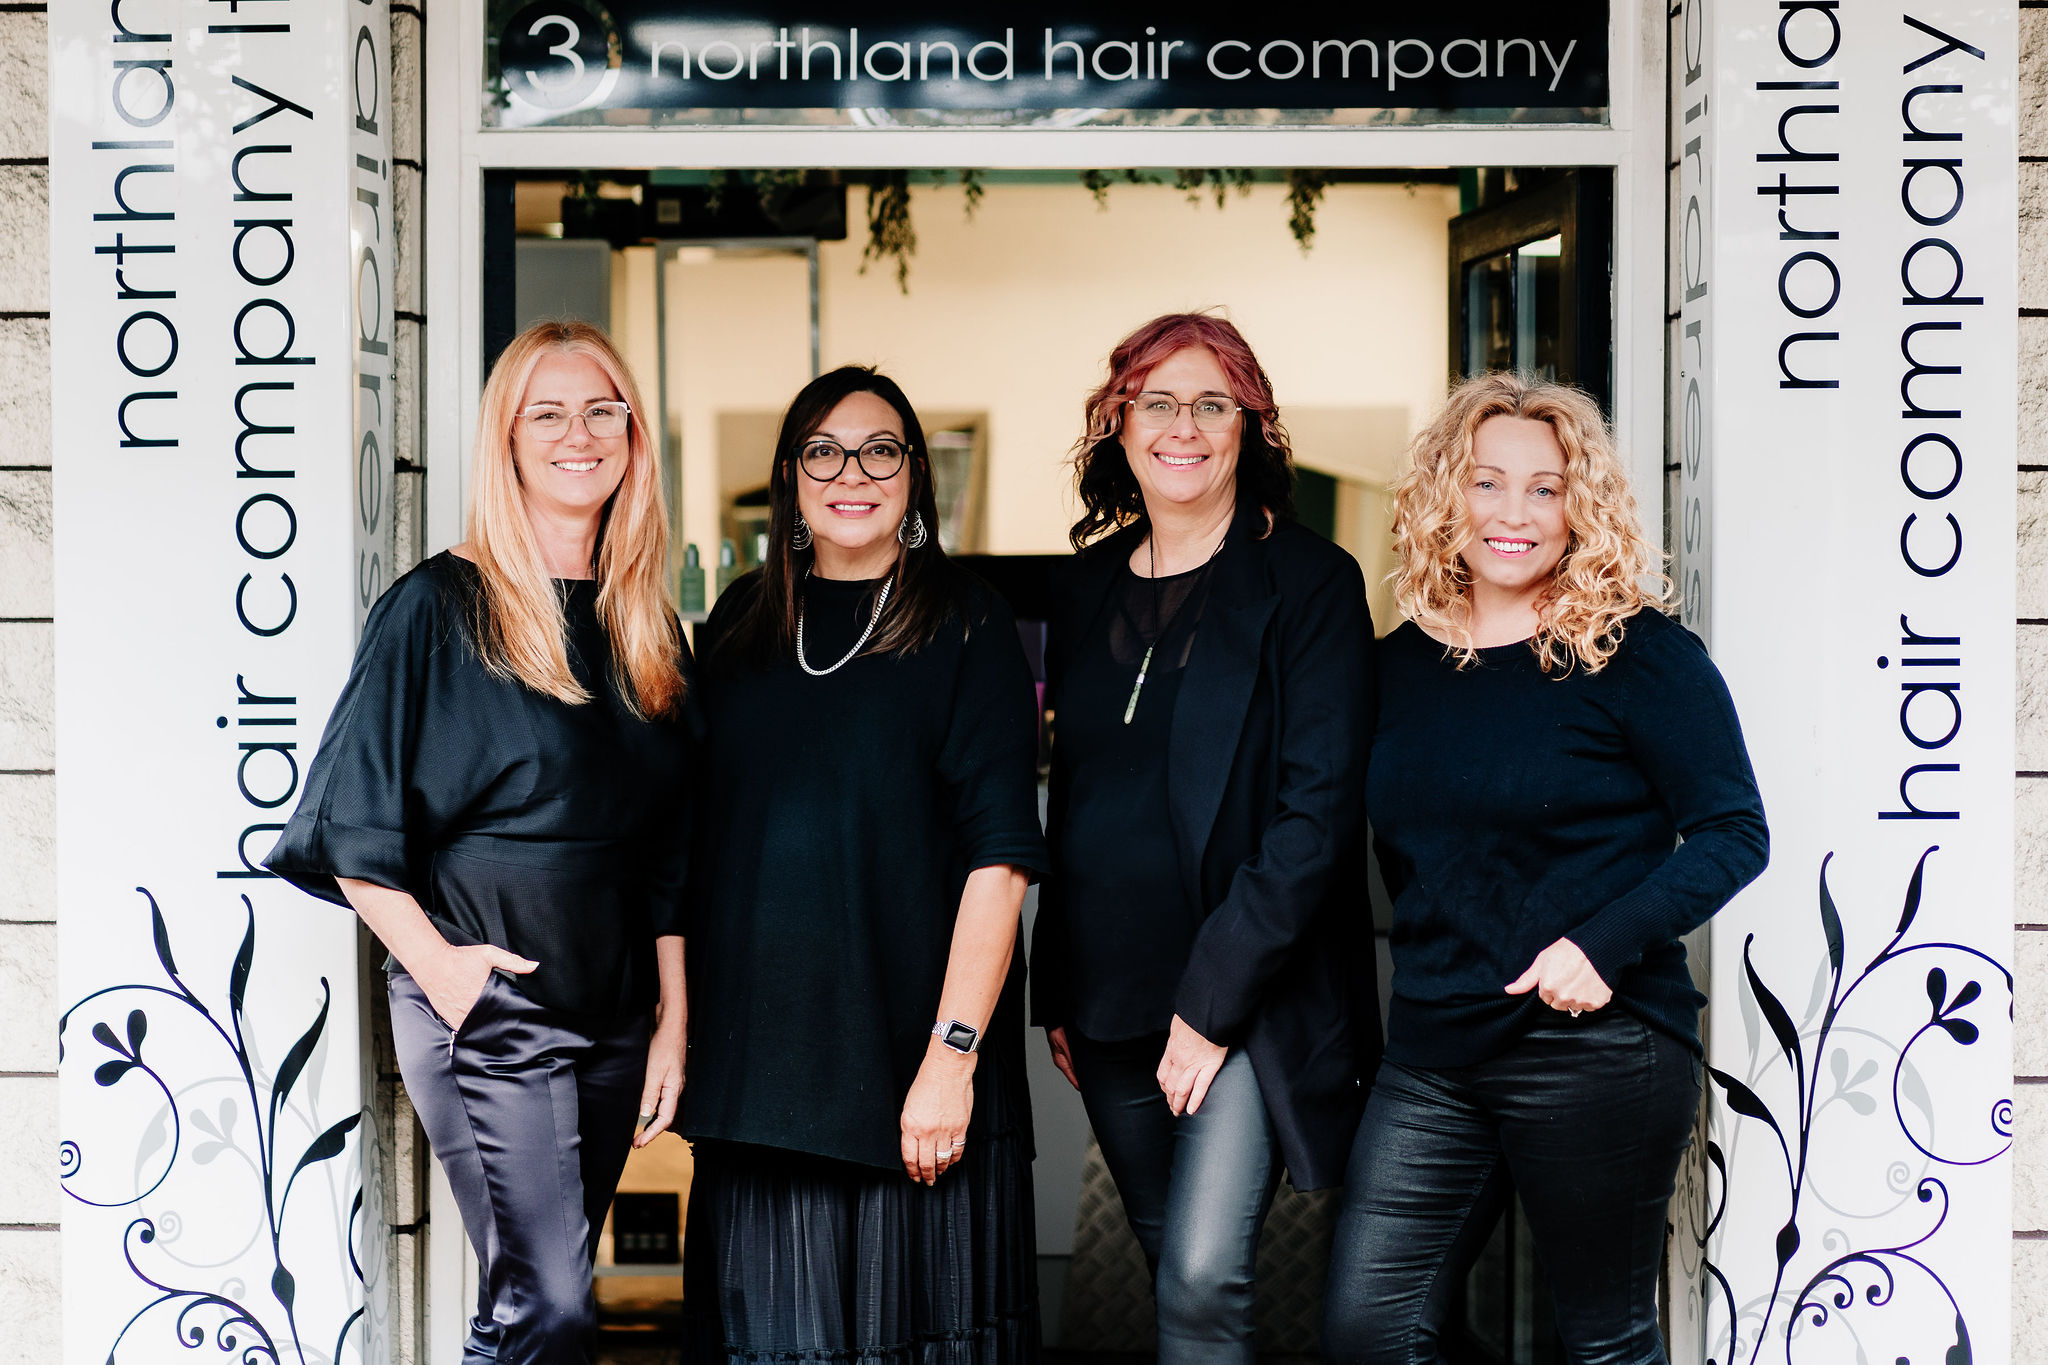 hairstylists at northland hair company